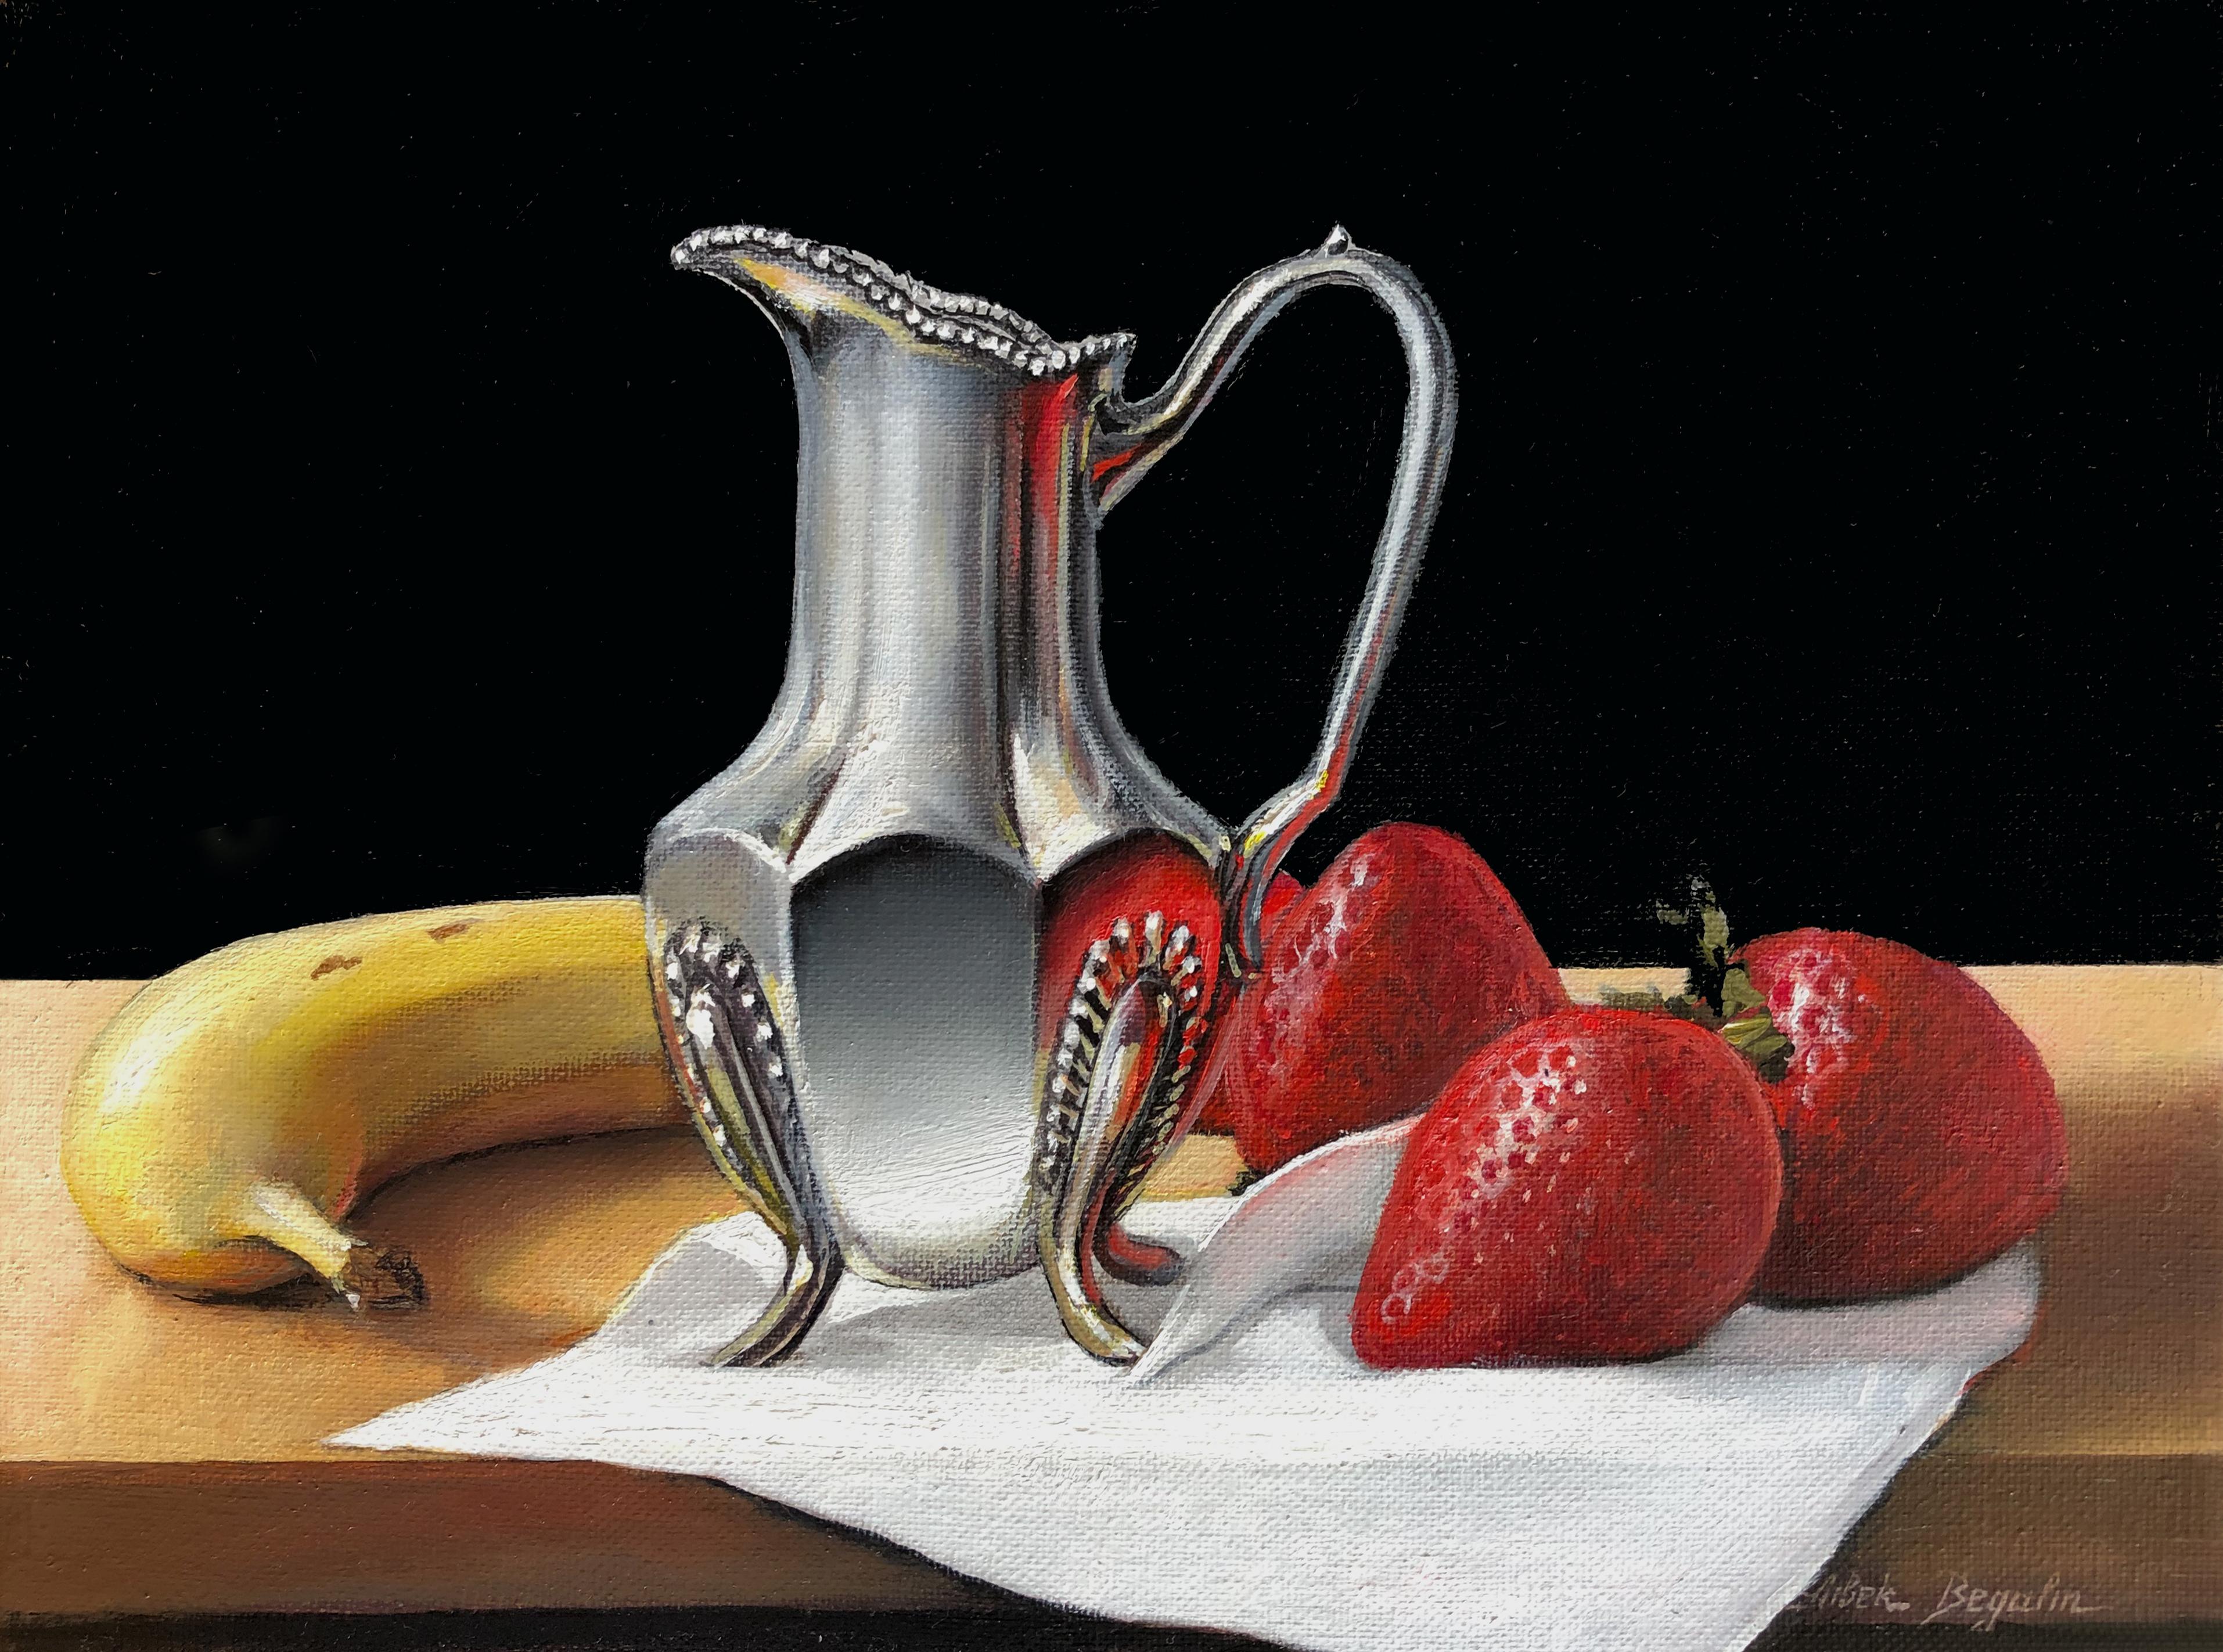 Aibek Begalin Still-Life Painting - Strawberry, Still Life, Original Oil Painting, One of a Kind